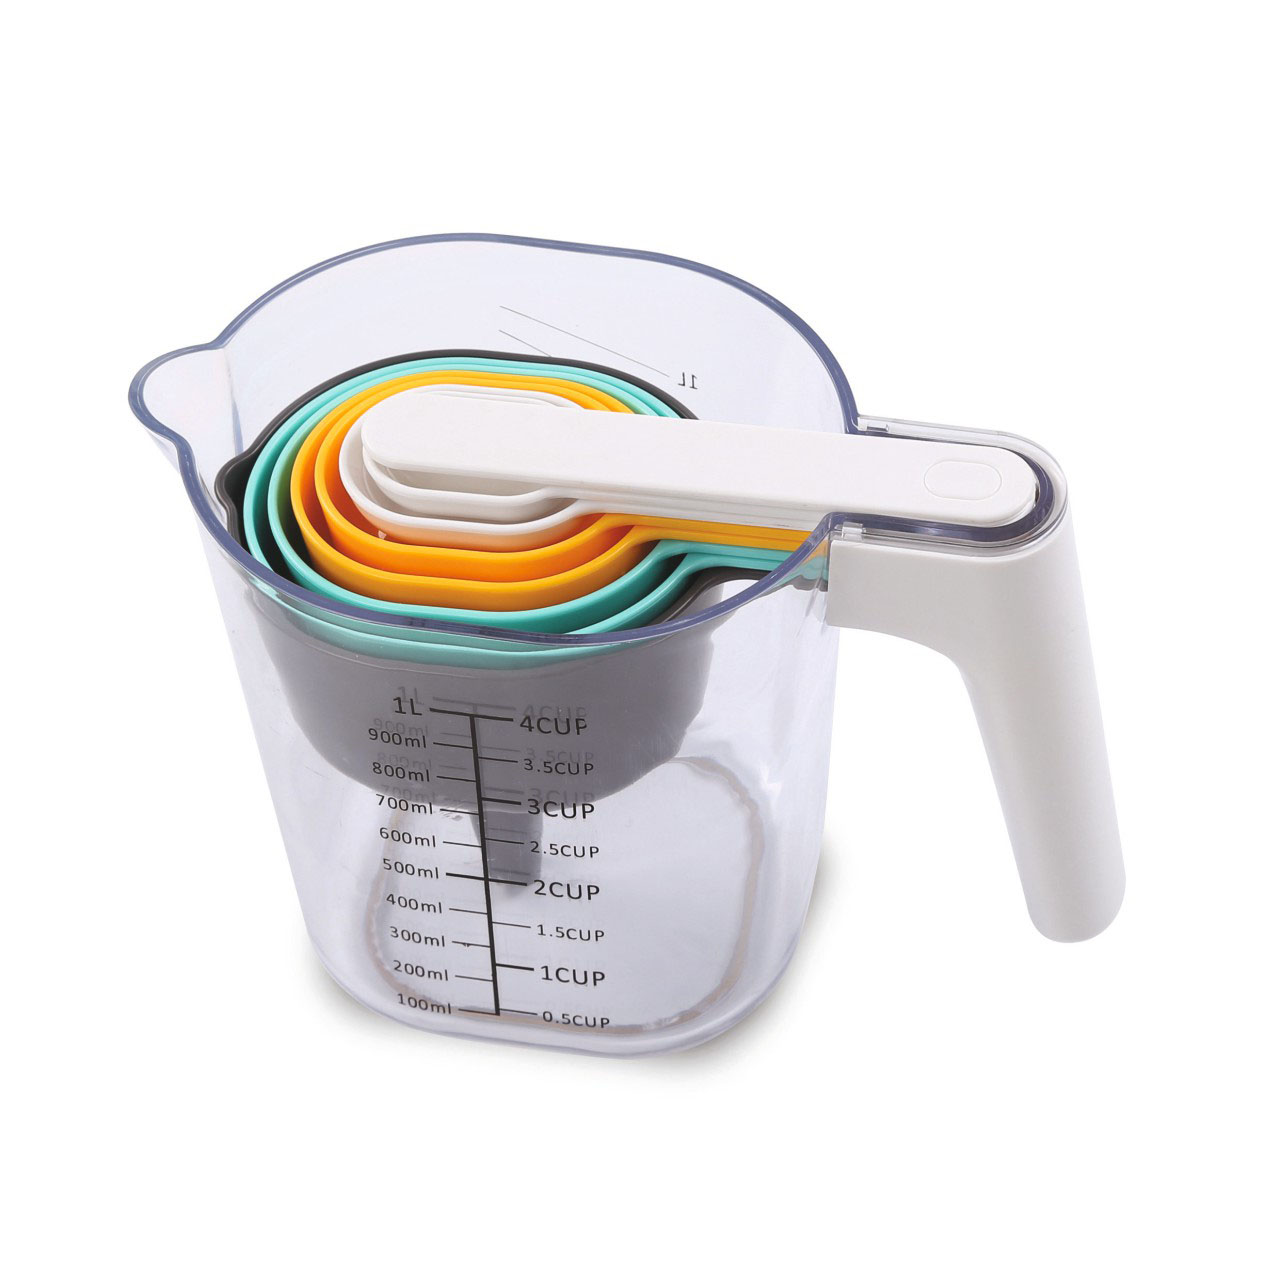 Compact Measuring Jug and Spoons Set - 9 Piece